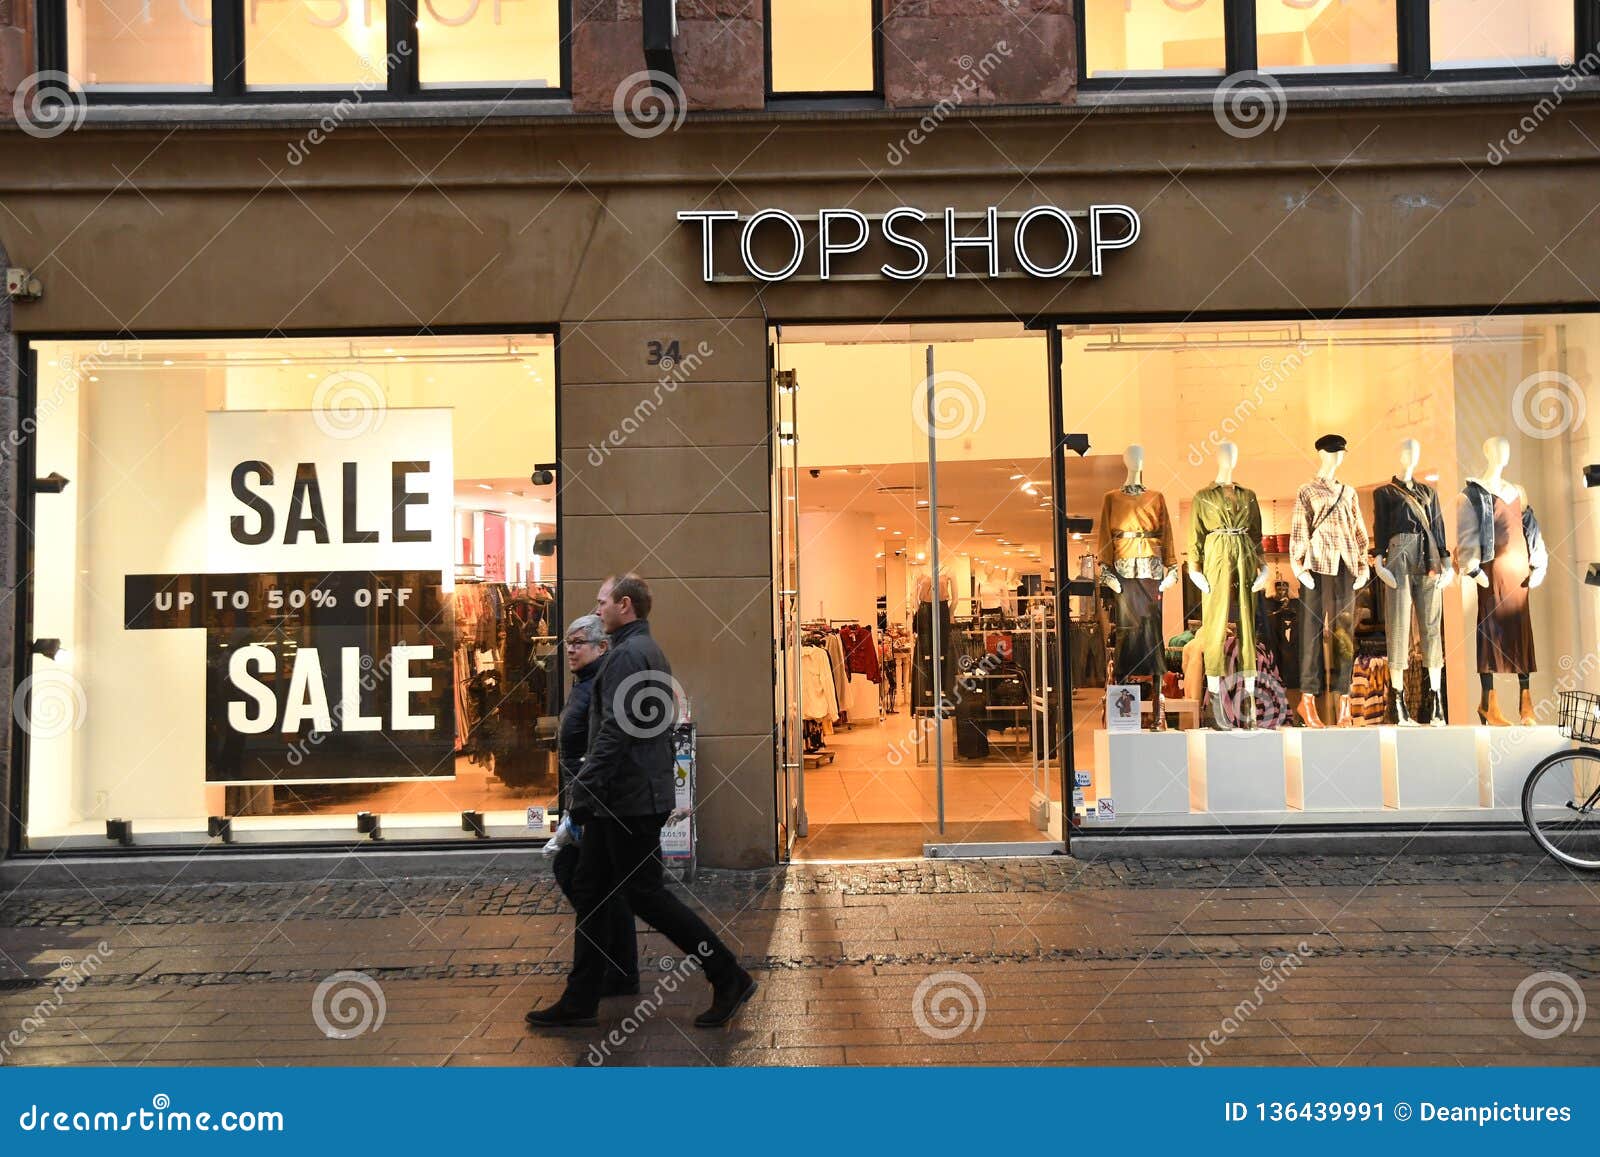 SALE on VARIOUS STOREE DENMARK Editorial Photo Image of shoppers, finance: 136439991